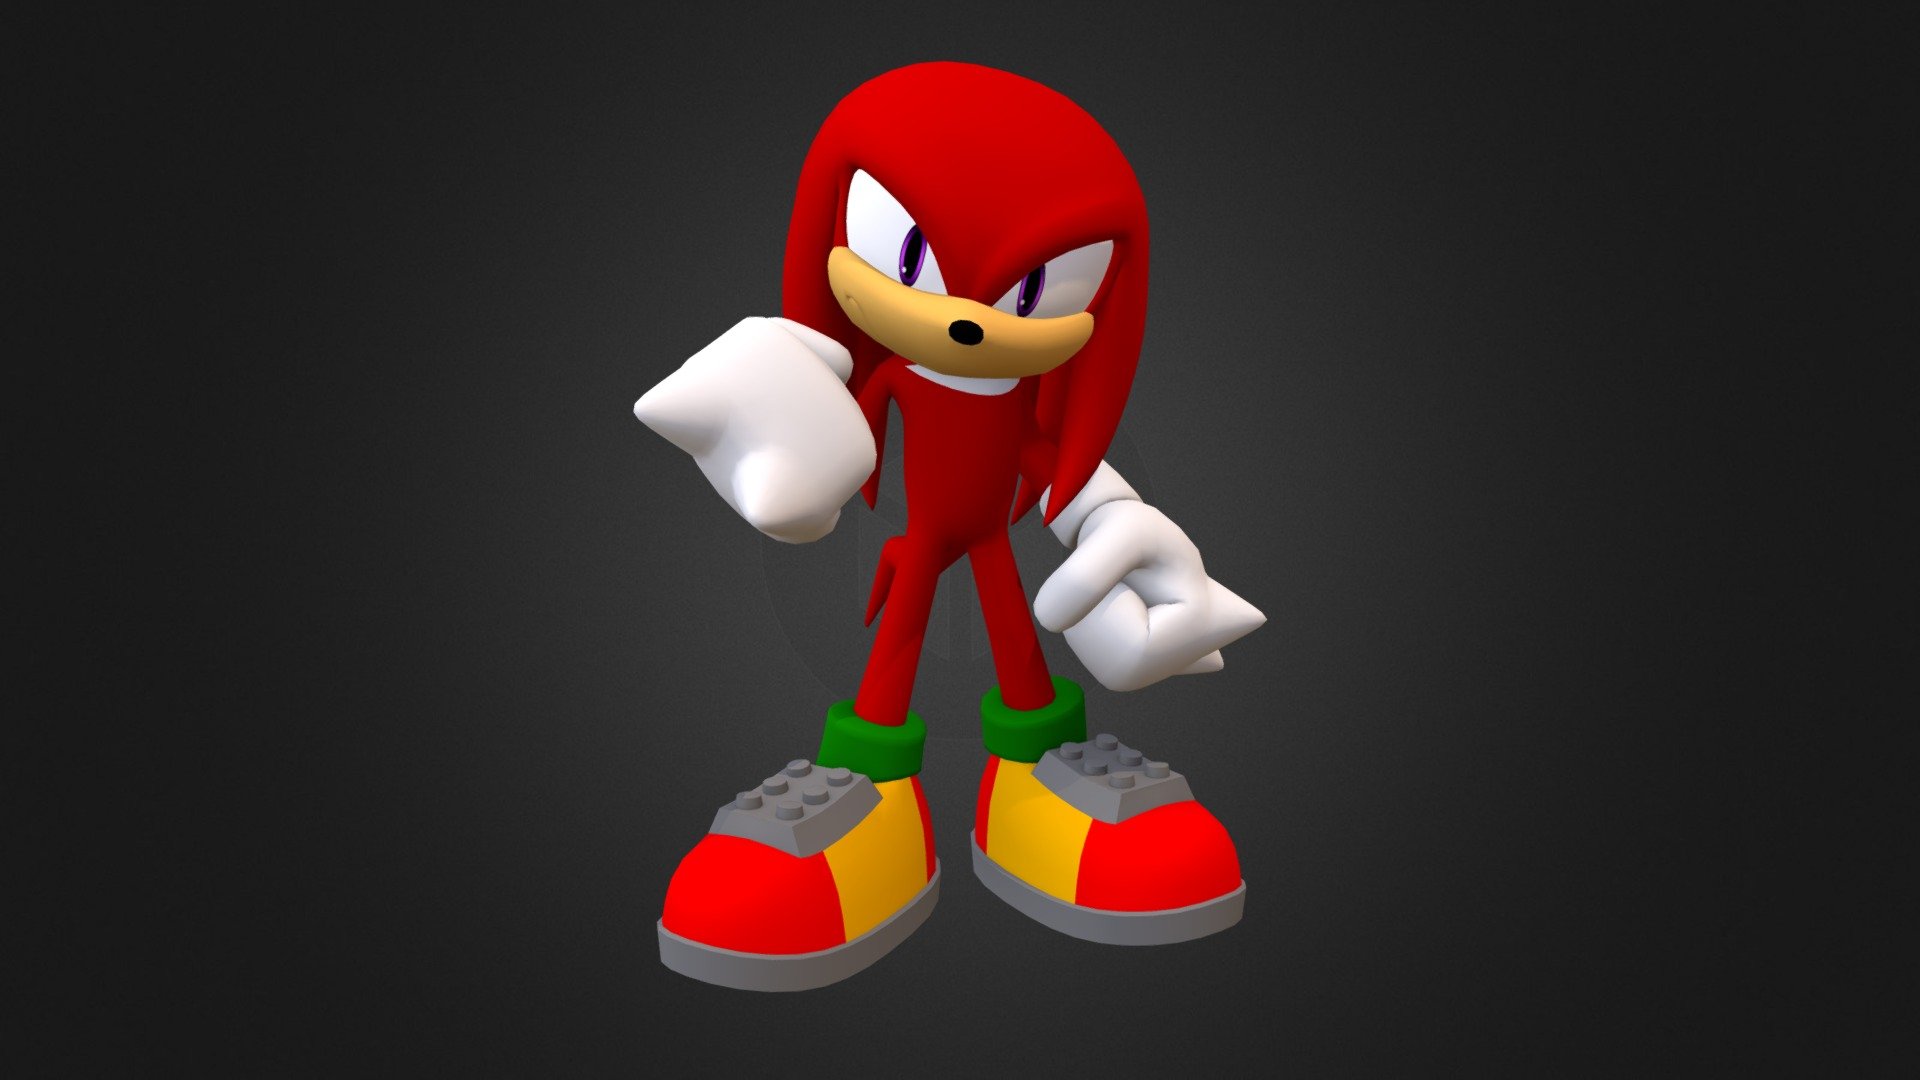 Get buff. Eat enchiladas. Play as Knuckles now in Sonic Runners Adventure! http://gmlft.co/SRA - Knuckles Model – Sonic Runners Adventure - 3D model by SonicRunnersAdventure 3d model